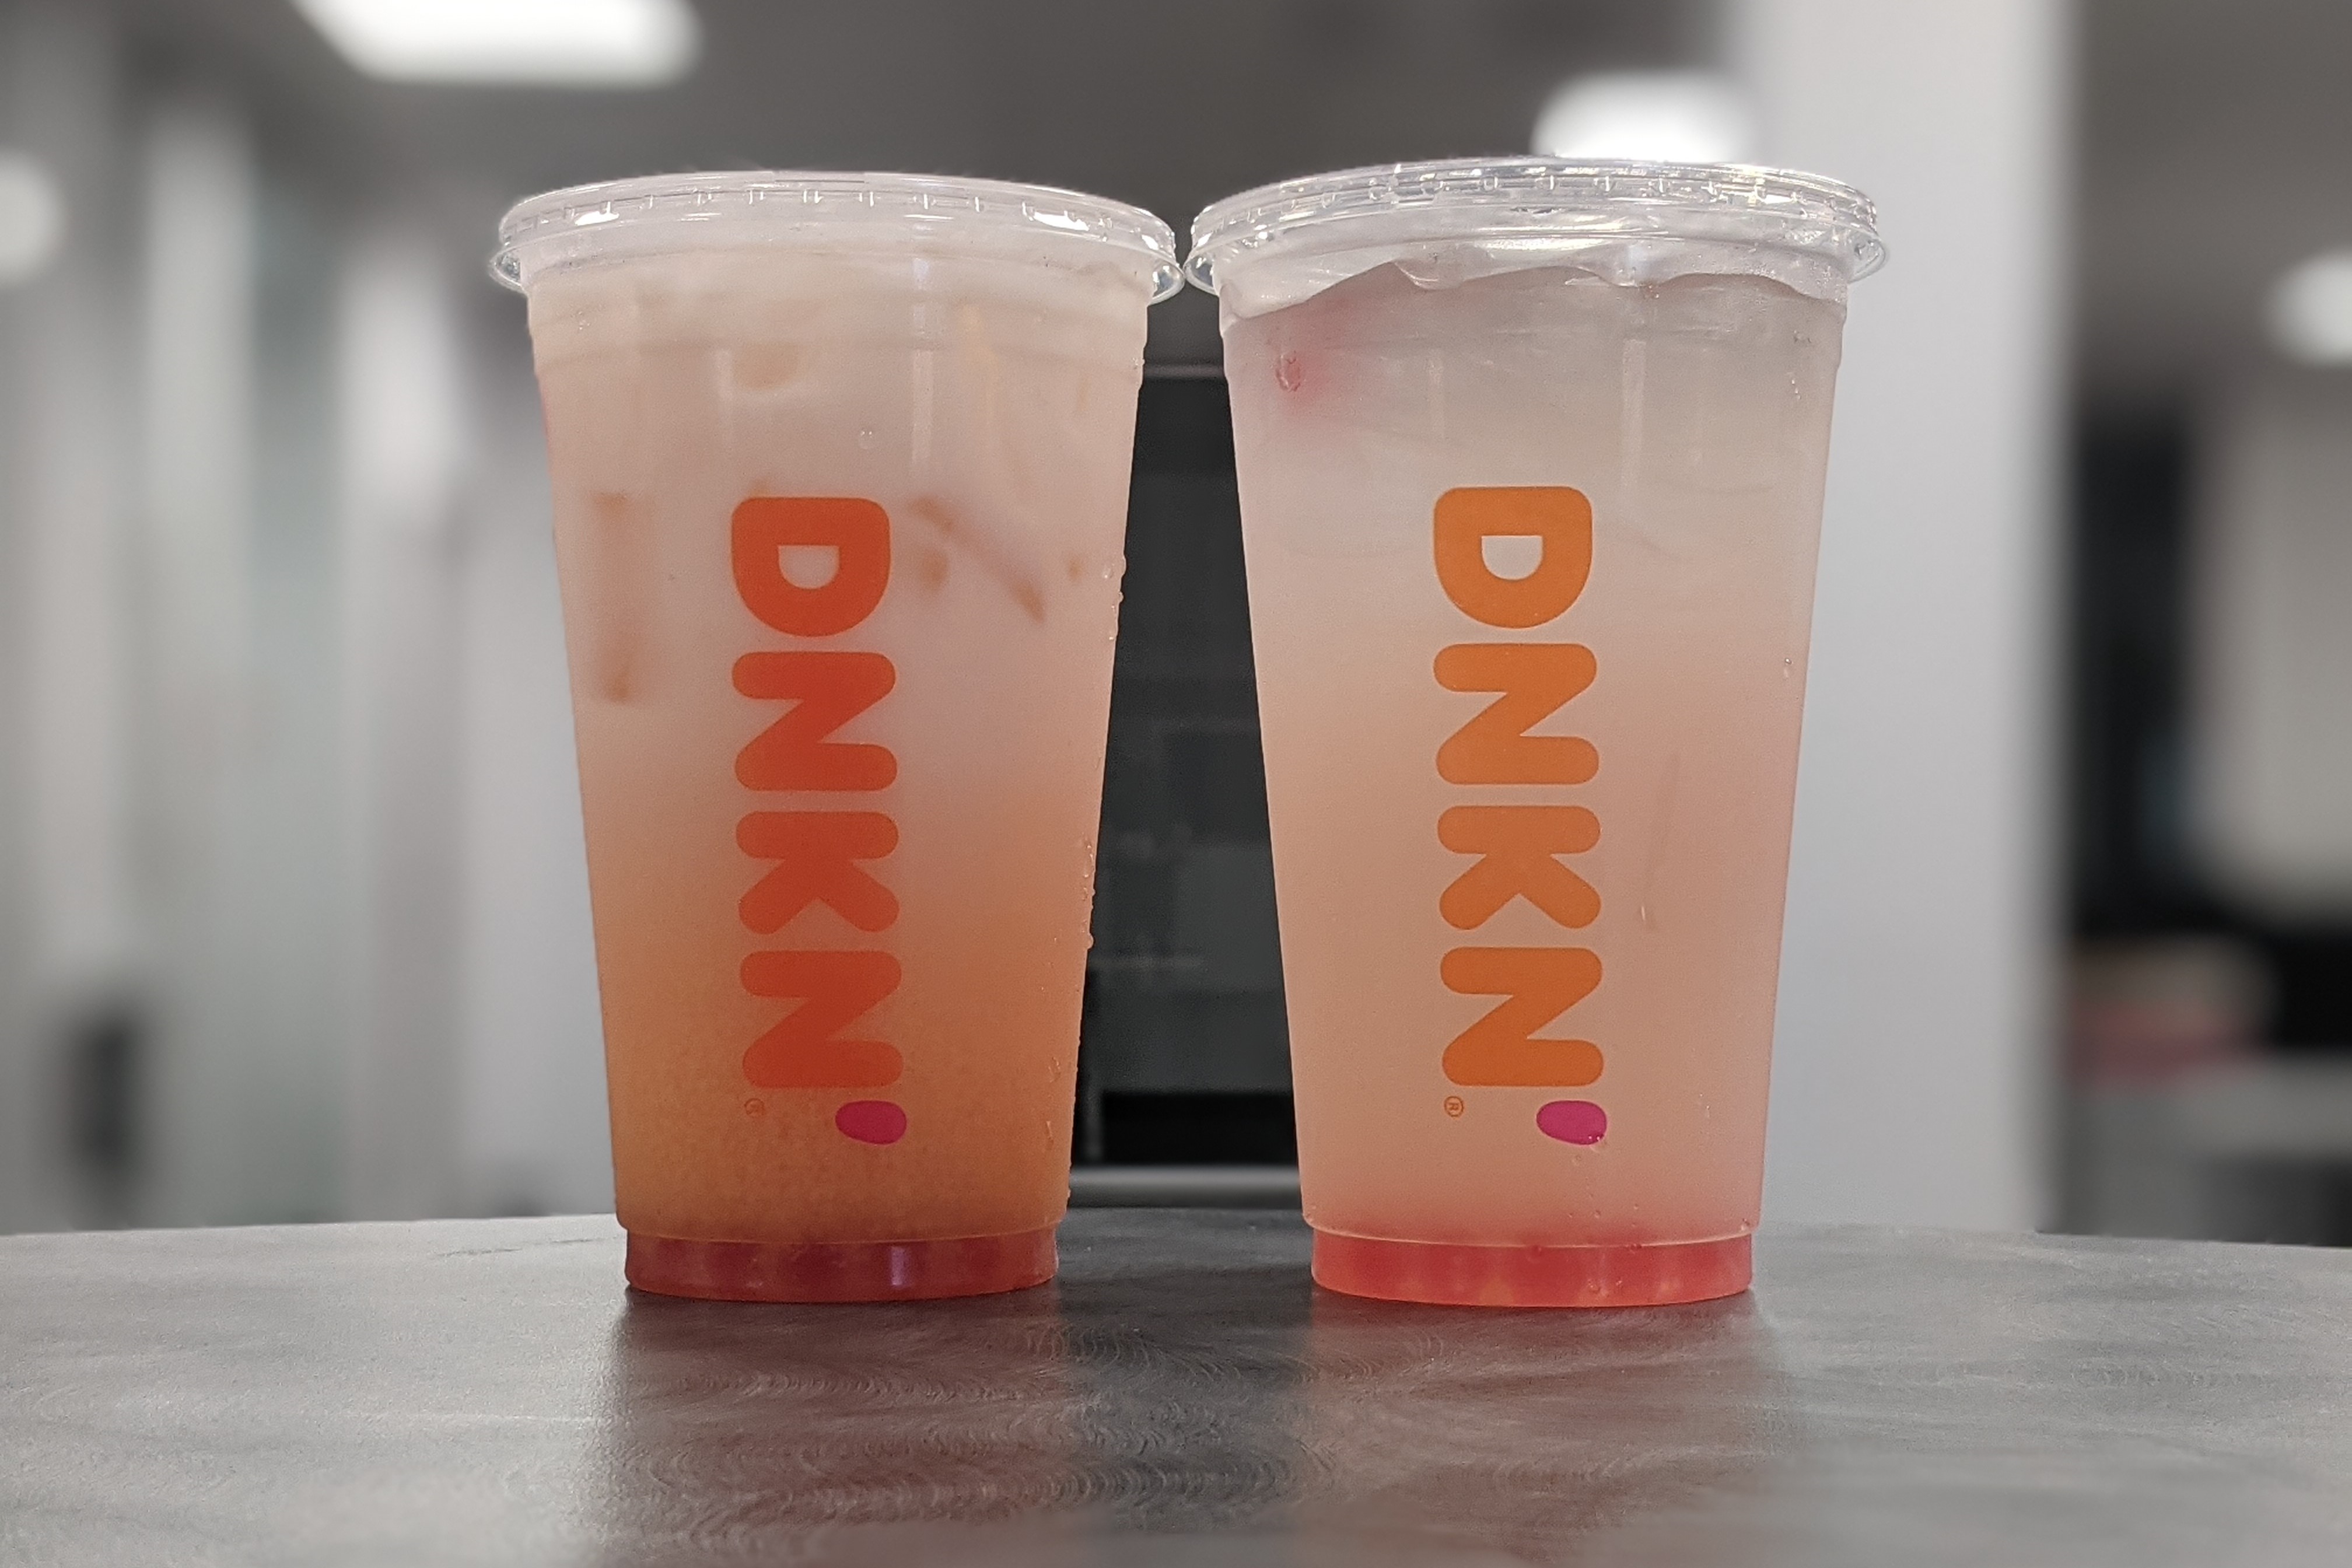 Dunkin' Popping Bubbles review: I ate it so you don't have to (and it's not  bubble tea) 